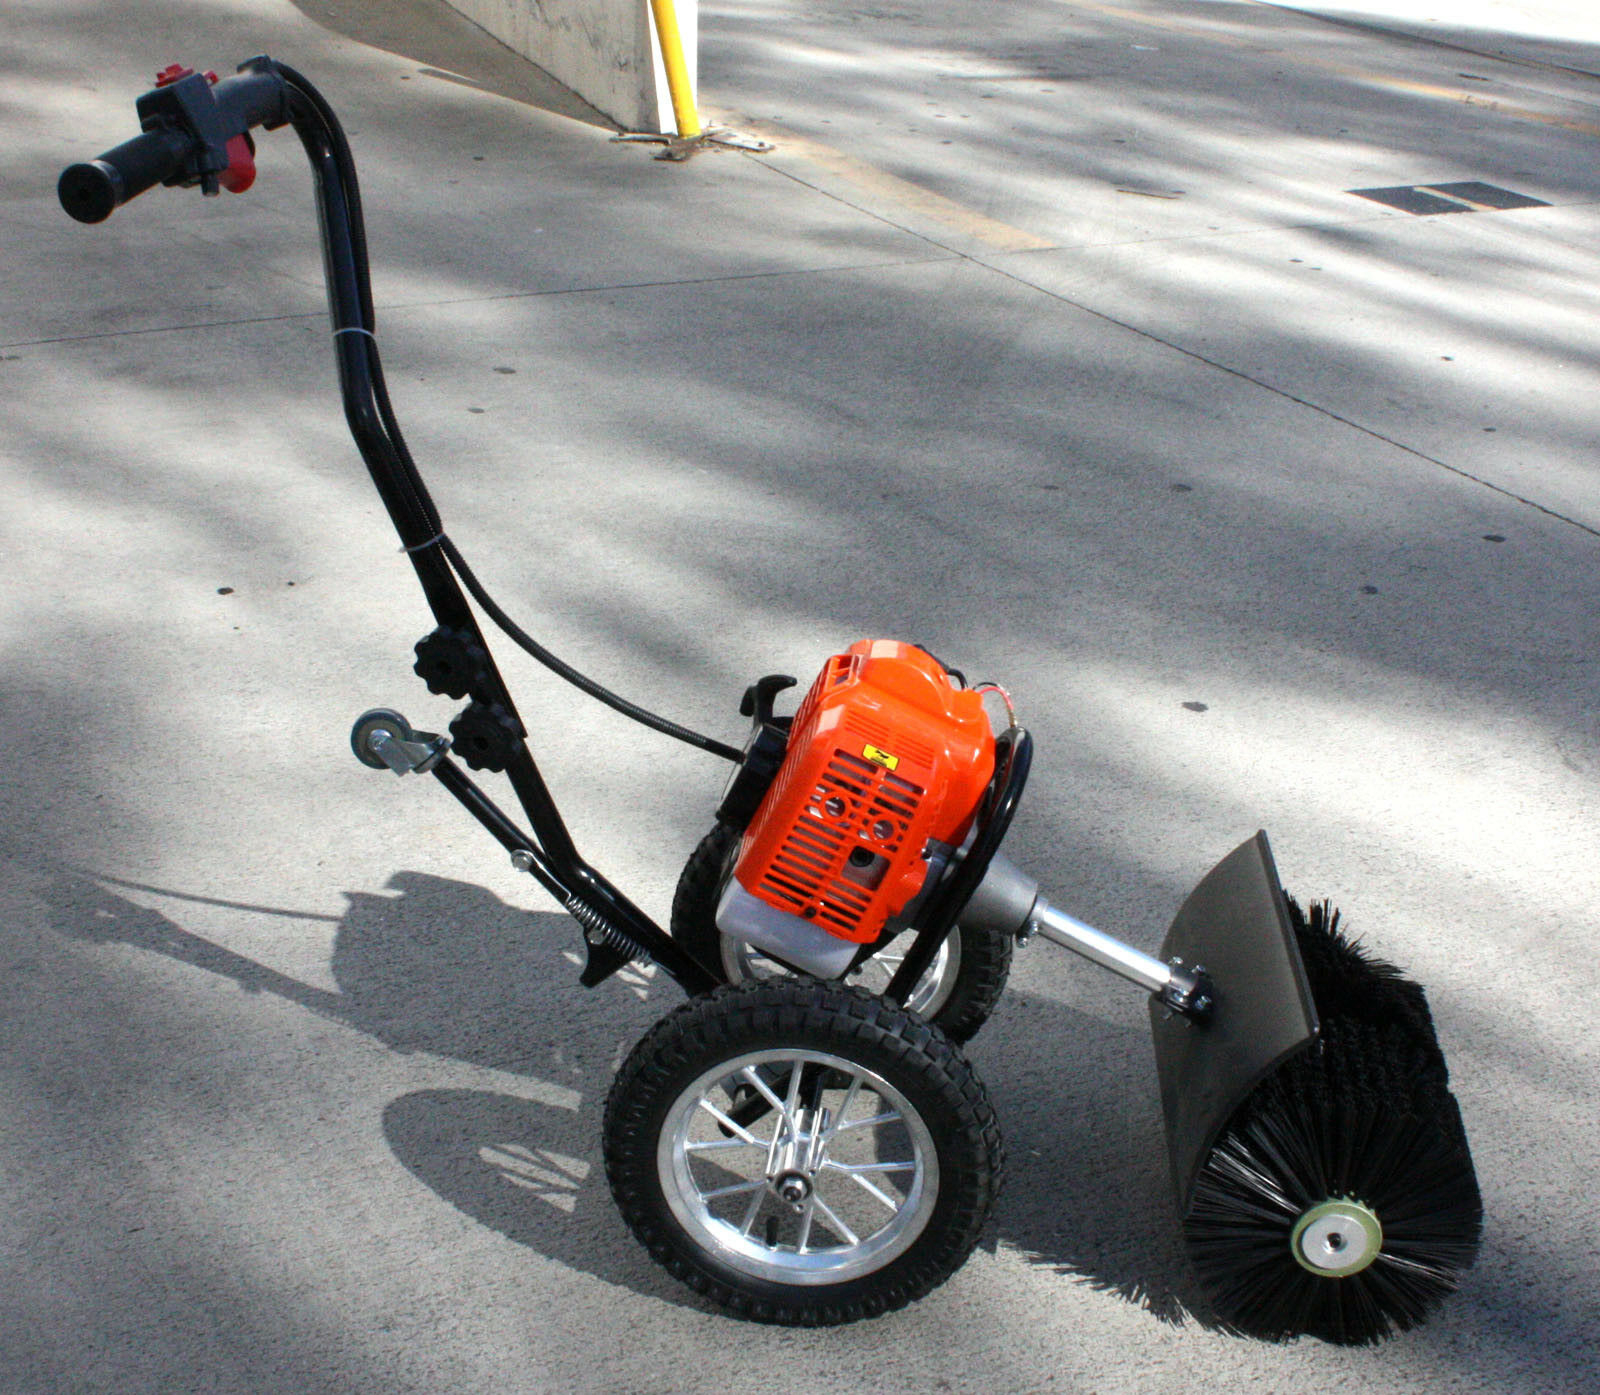 GAS POWER SWEEPER BROOM HAND HELD CONCRETE CLEANING DRIVEWAY WALK BEHIND 52CC 